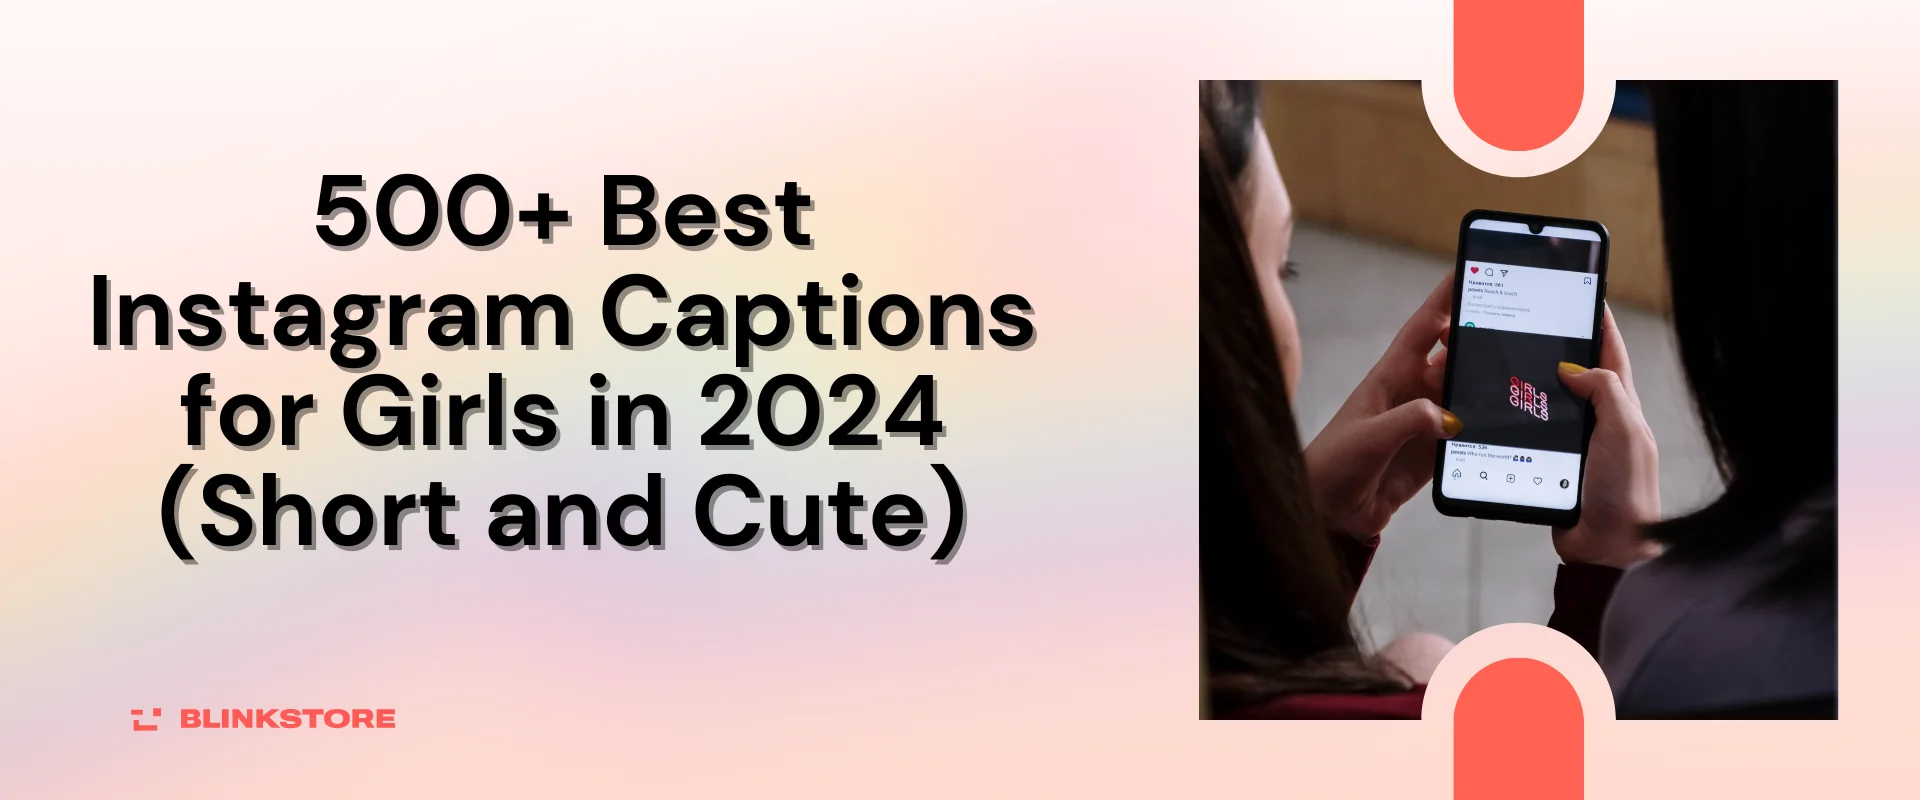 500+ Best Instagram Captions for Girls in 2024 (Short and Cute)